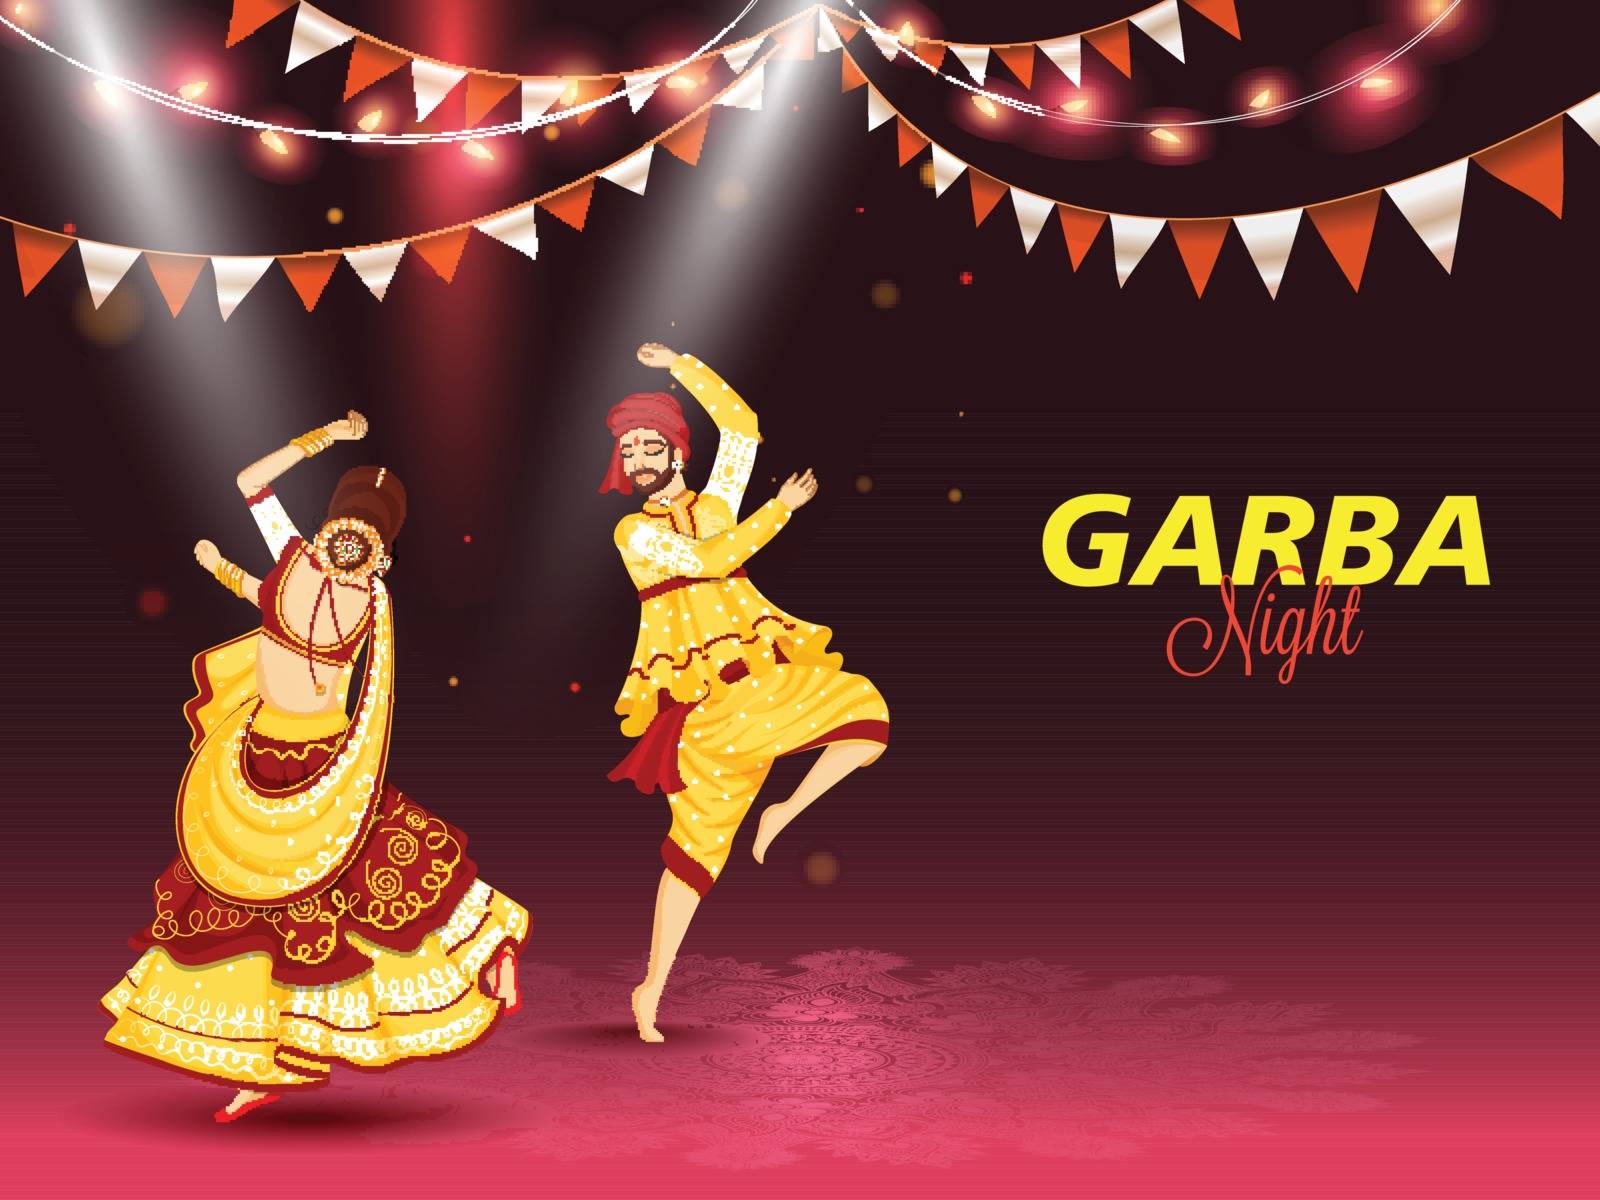 Illustration of couple dancing on occasion of Garba Night celebr by aispl